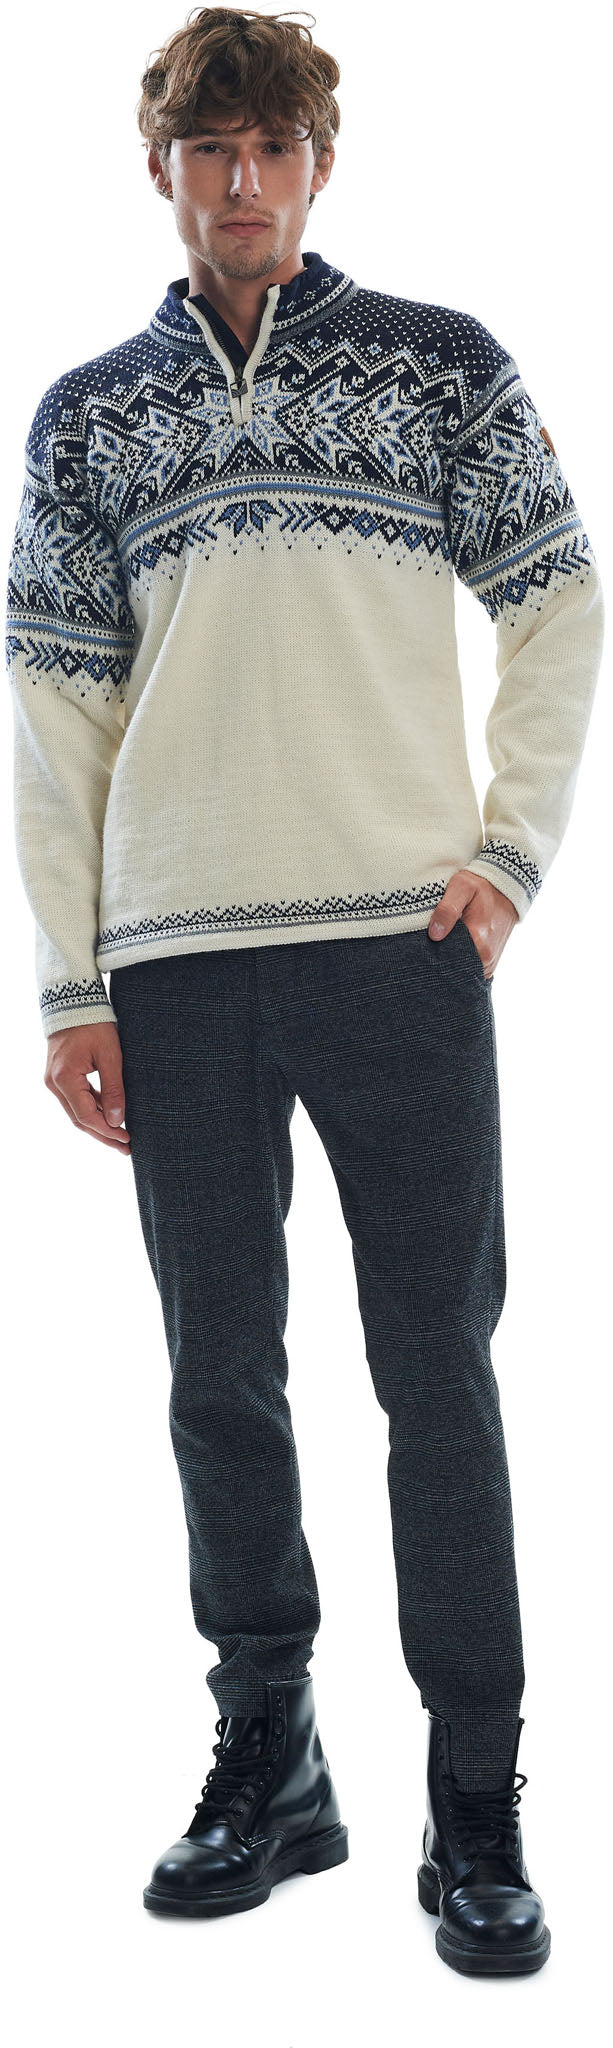 Dale of Norway Vail Sweater - Unisex